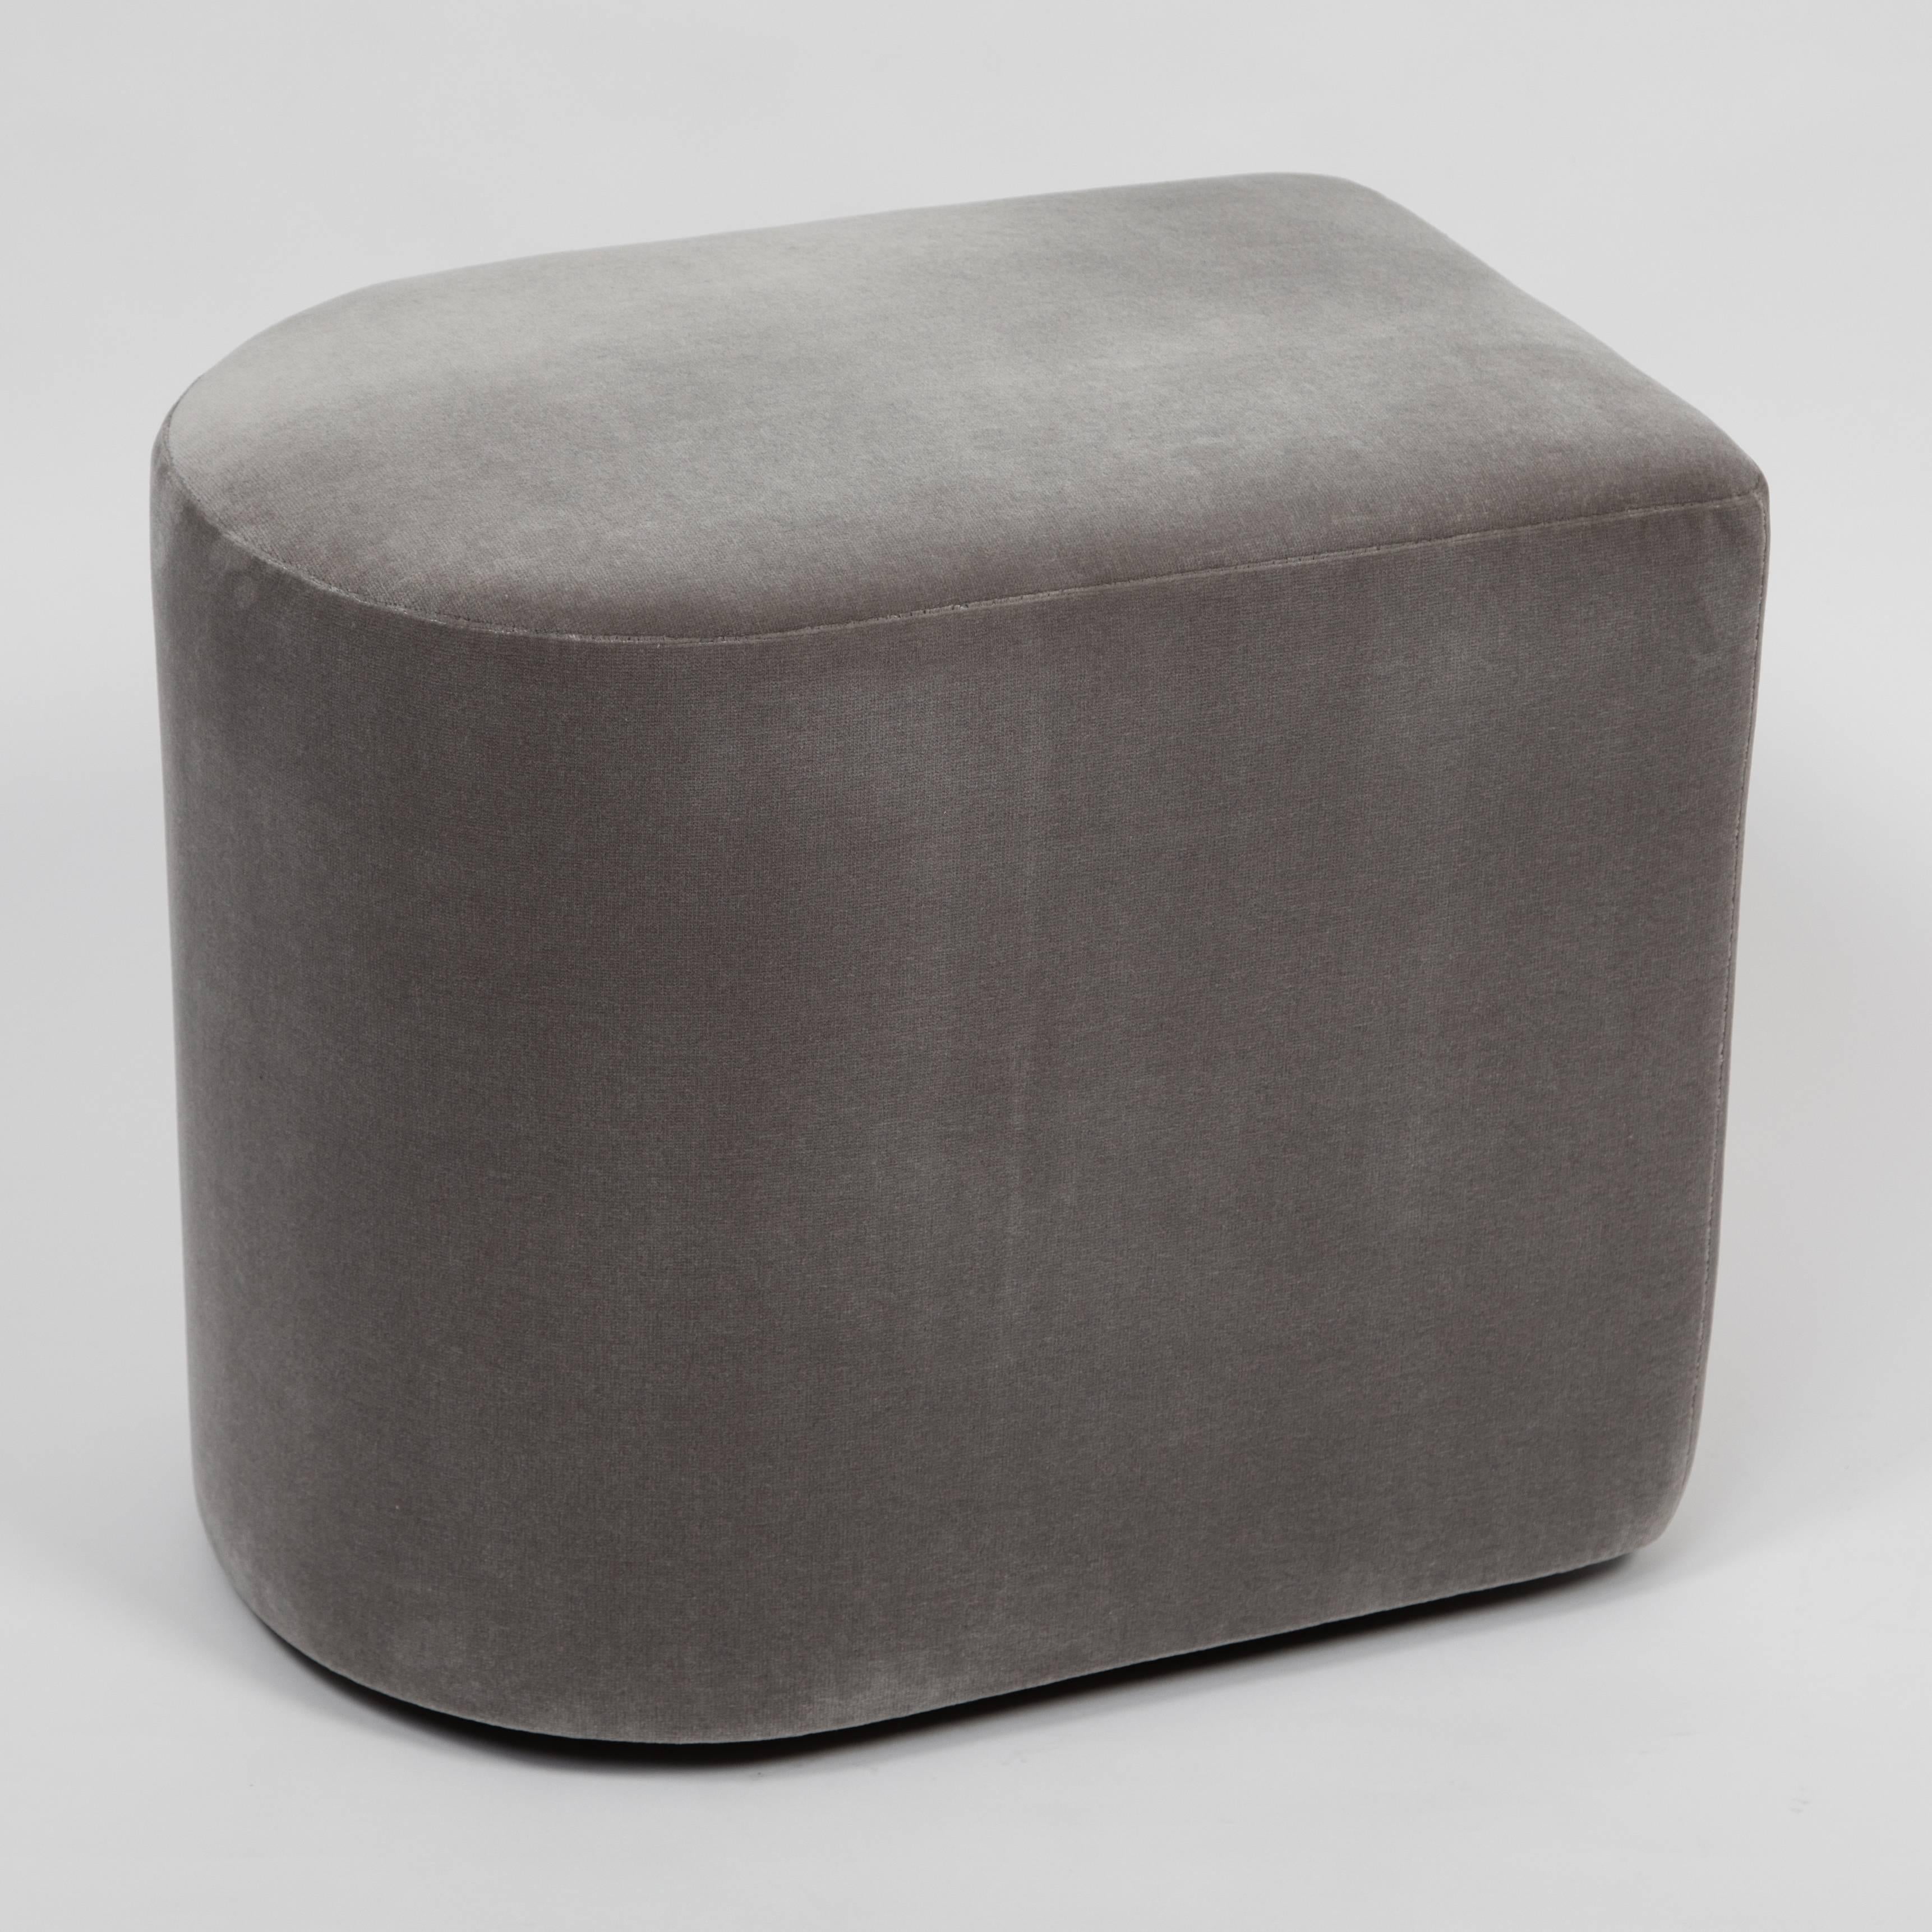 Unusual, rounded 1980s Milo Baughman stools on recessed casters. Newly reupholstered in smokey-gray cotton velvet. Signed 